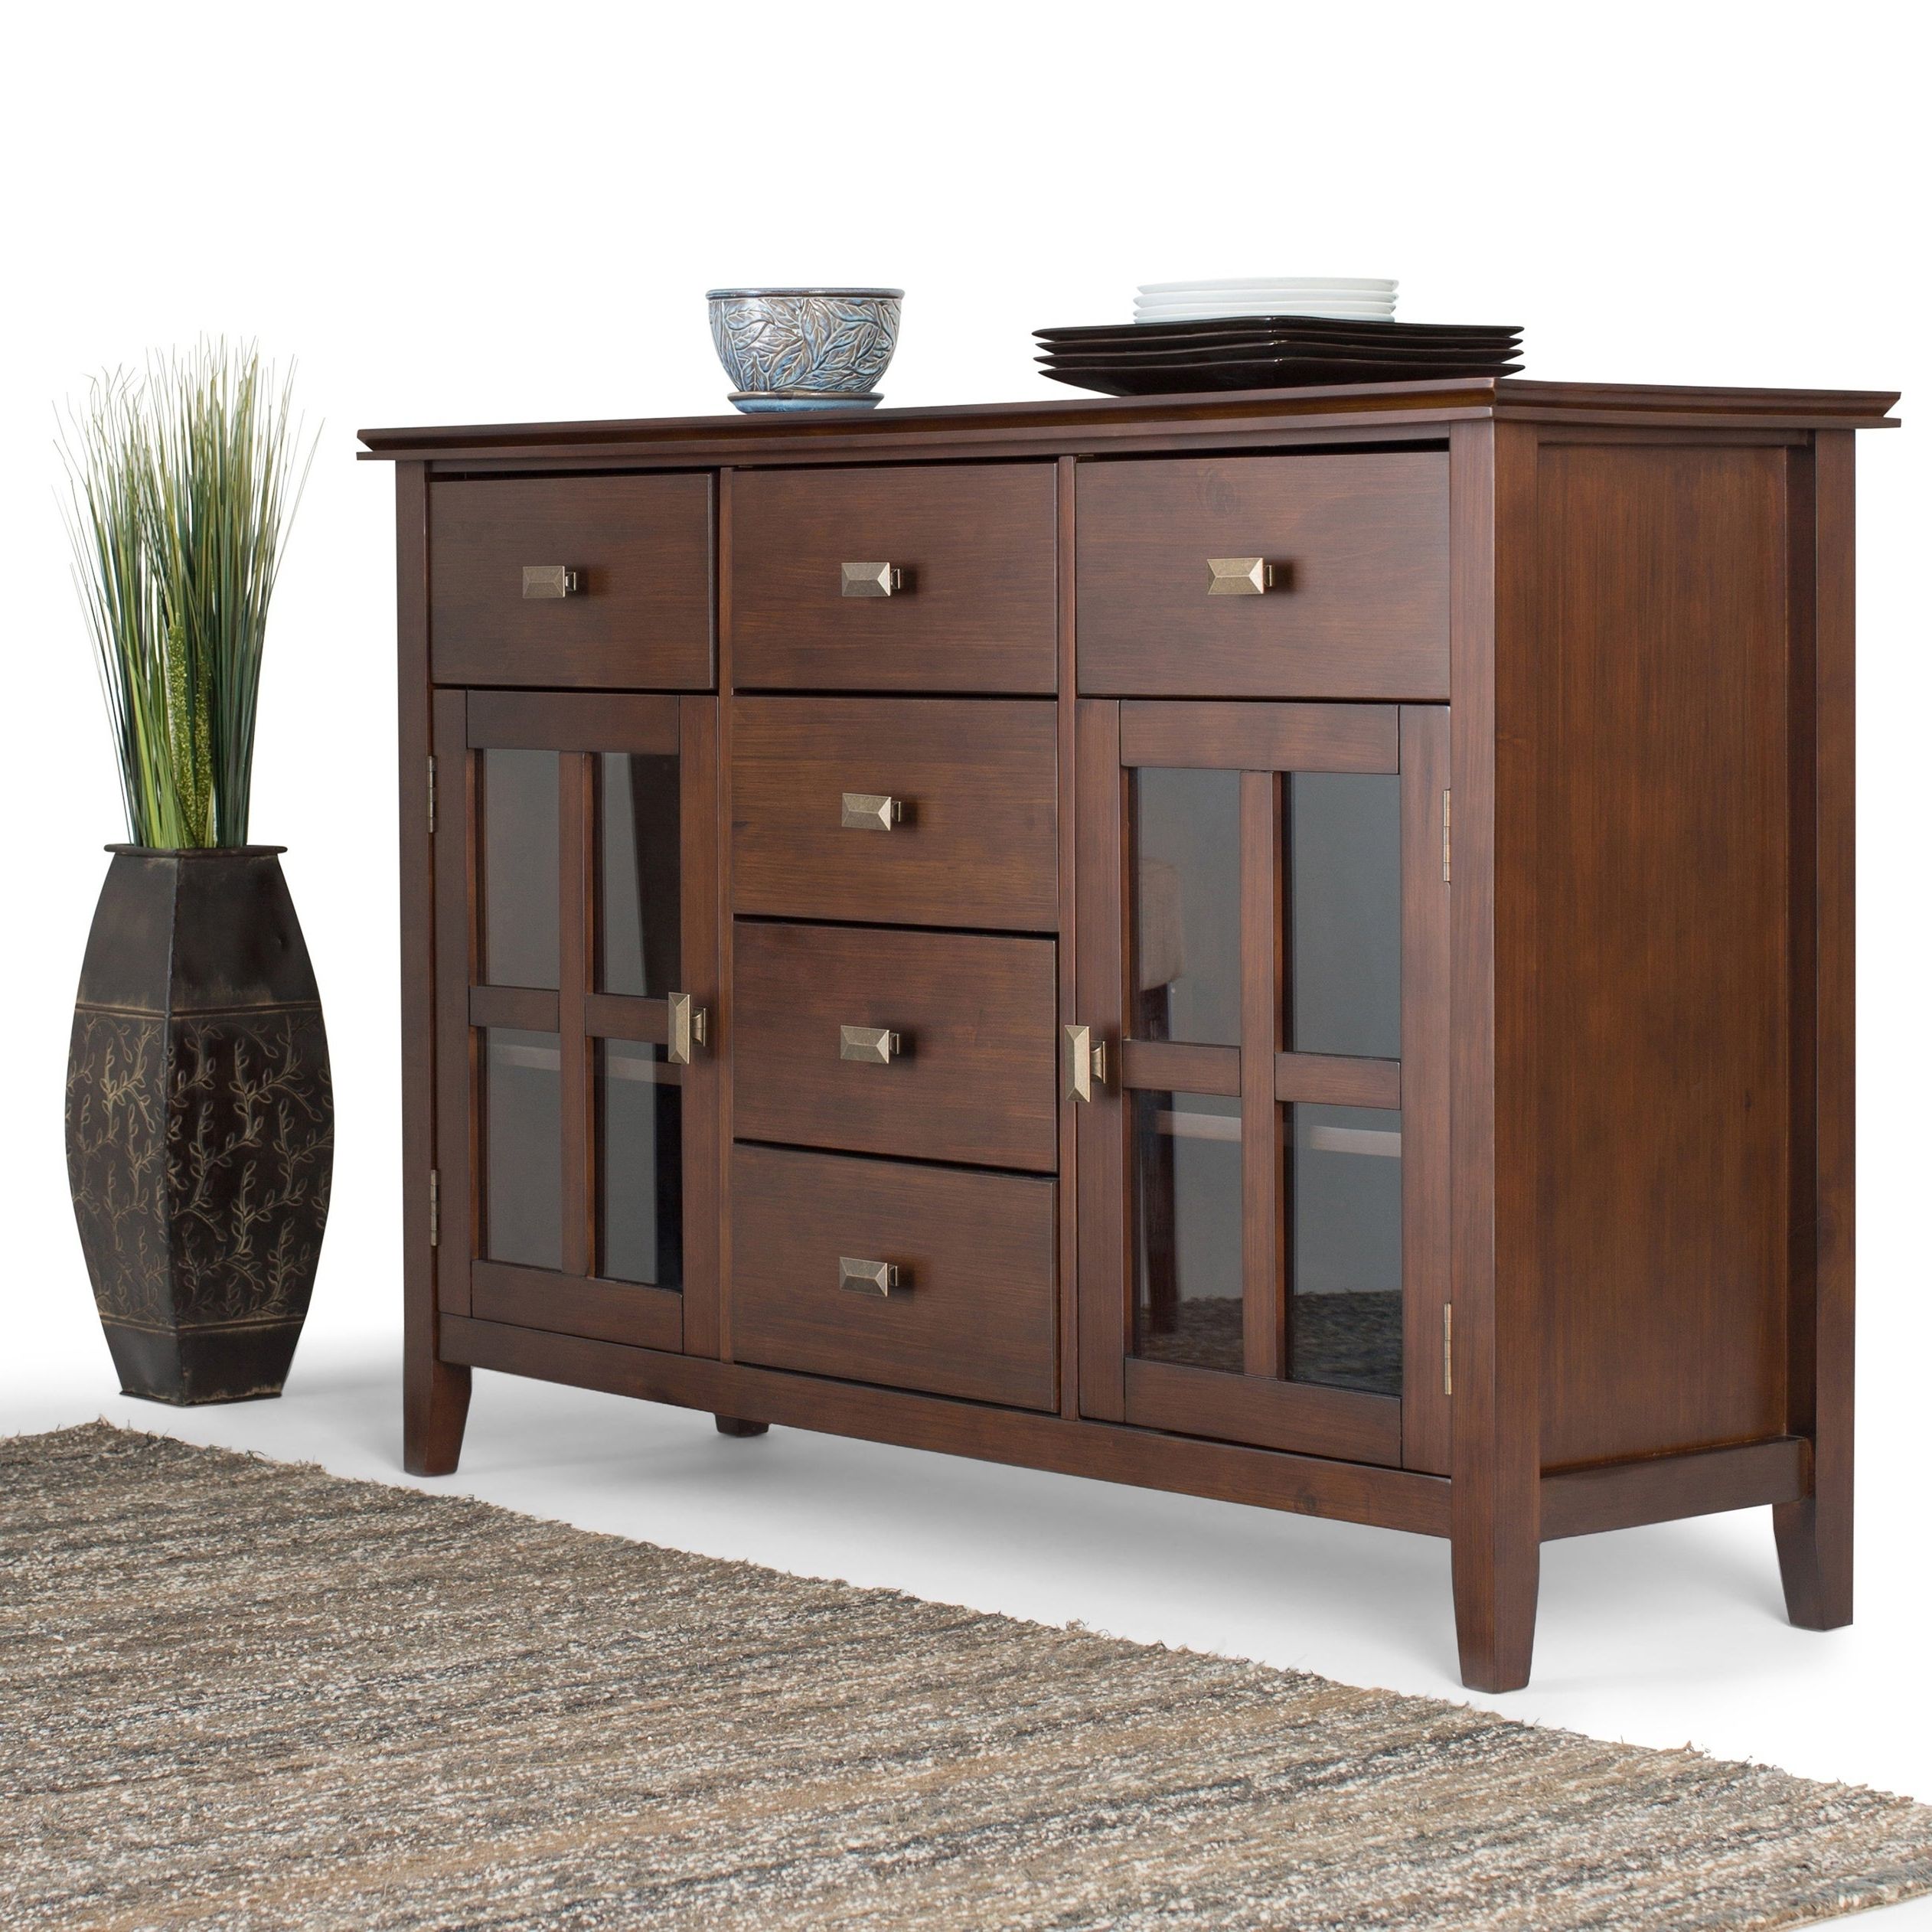 Wyndenhall Stratford Solid Wood 54 Inch Wide Contemporary Sideboard Buffet  Credenza – 54 Inch Wide Intended For Solid Wood Contemporary Sideboards Buffets (View 1 of 20)